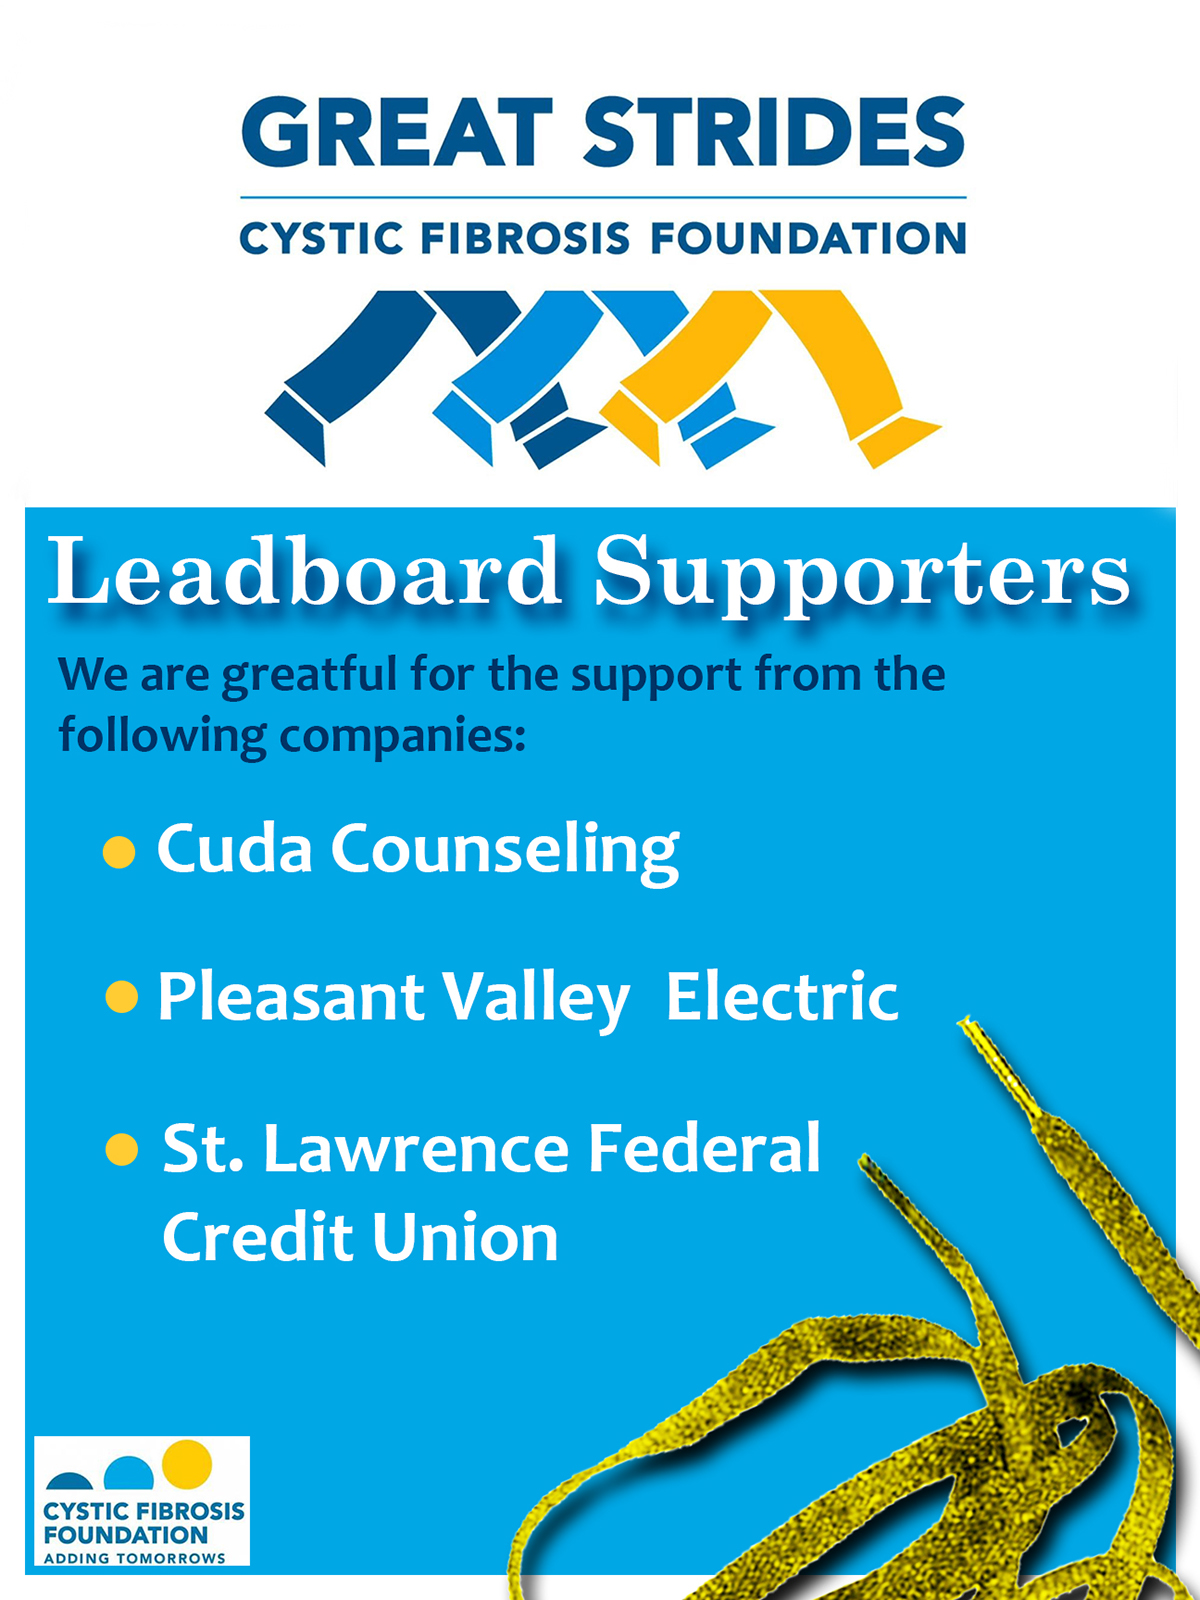 Cystic Fibrosis Foundation great strides poster sponsors